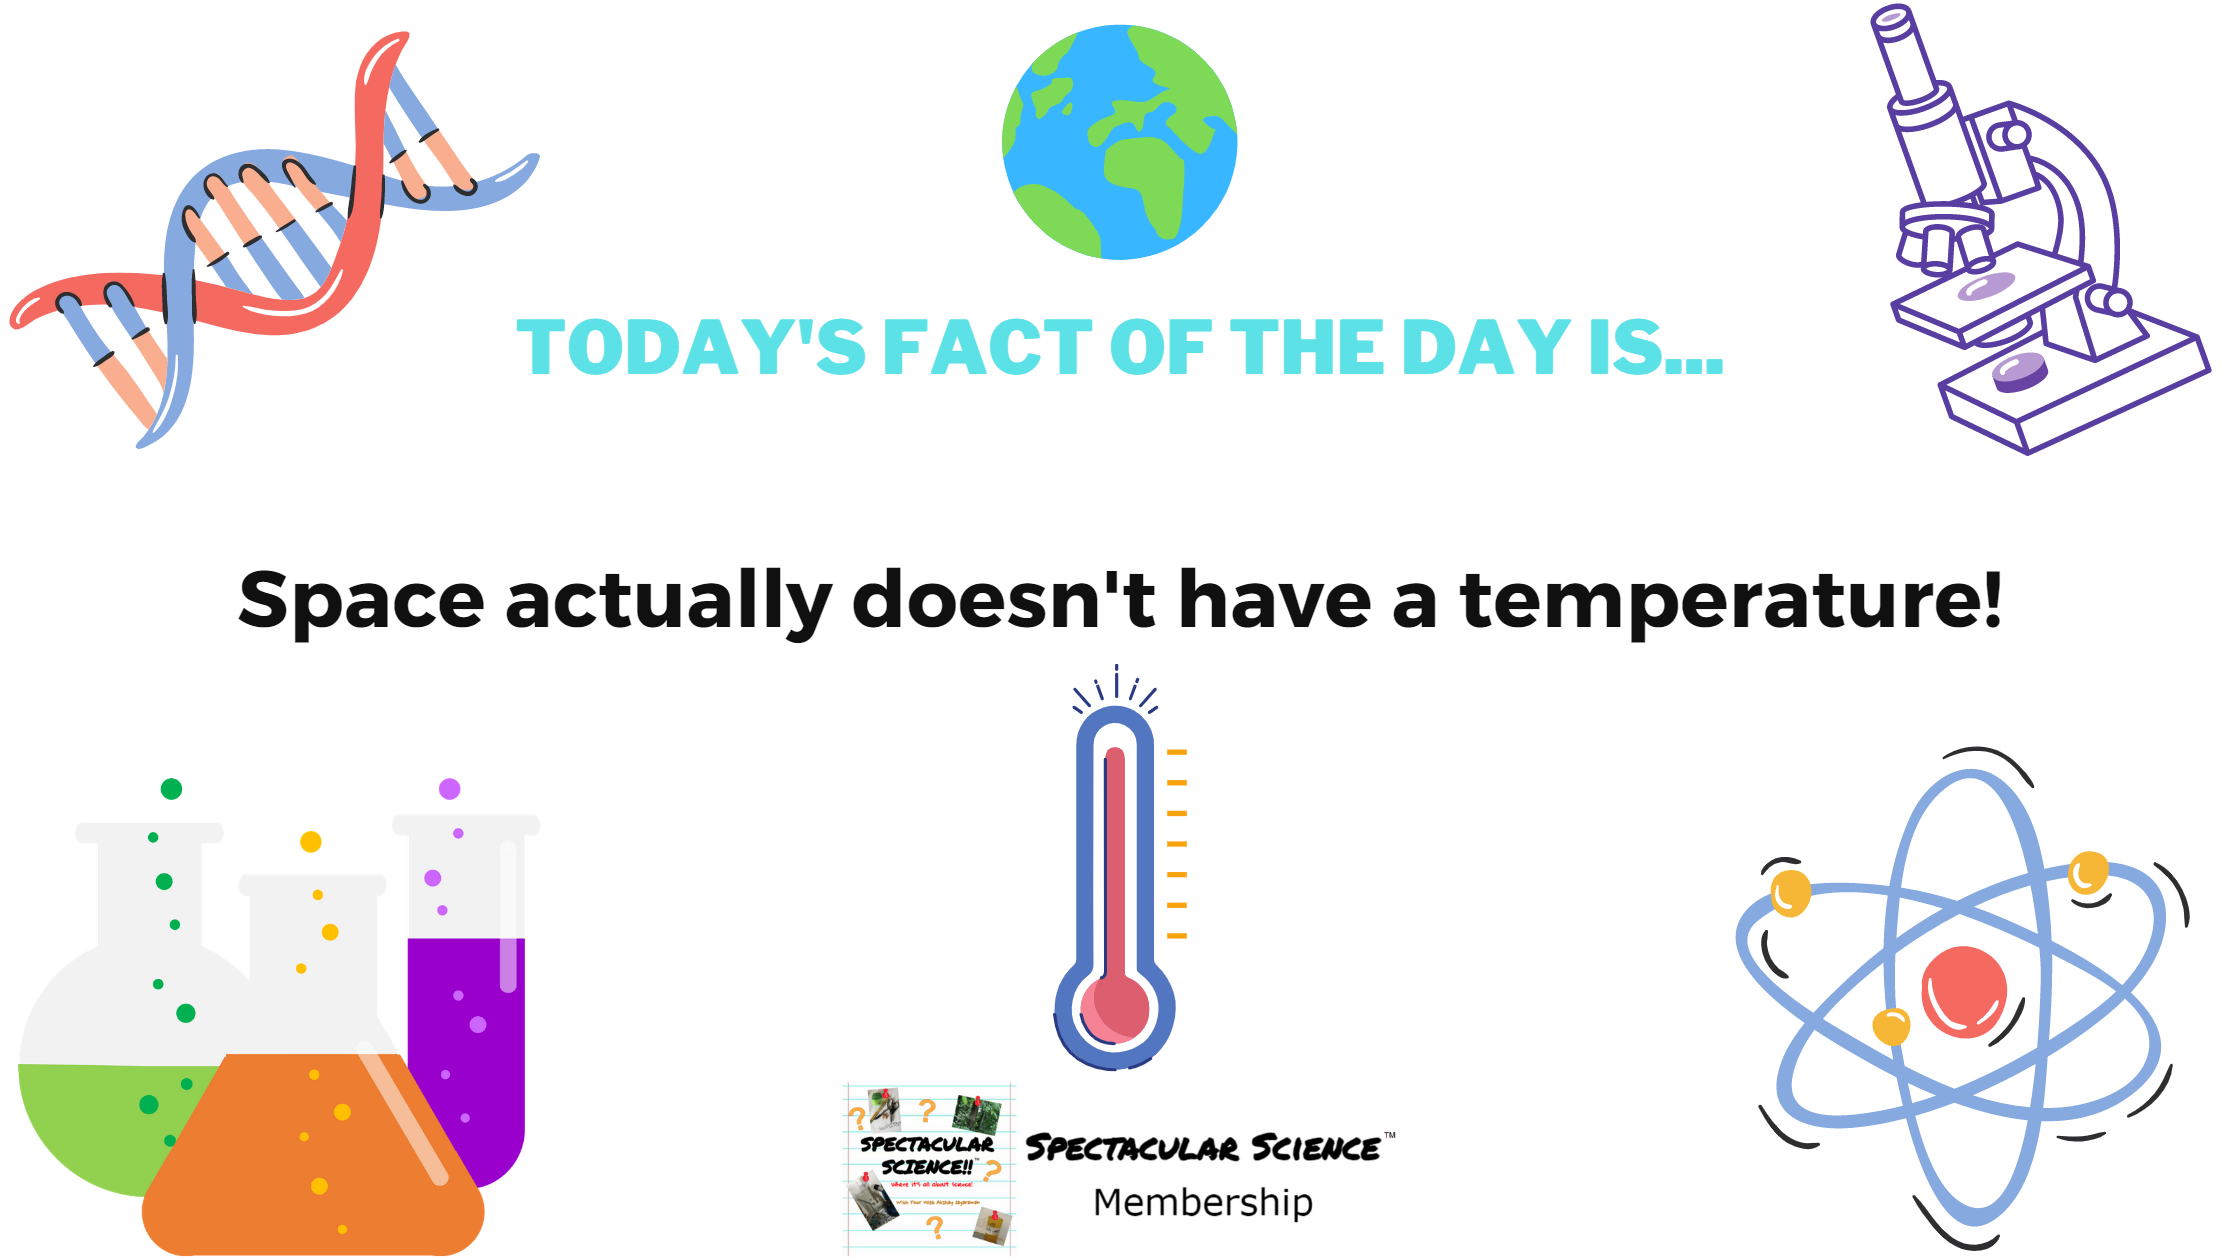 Fact of the Day Image February 2nd